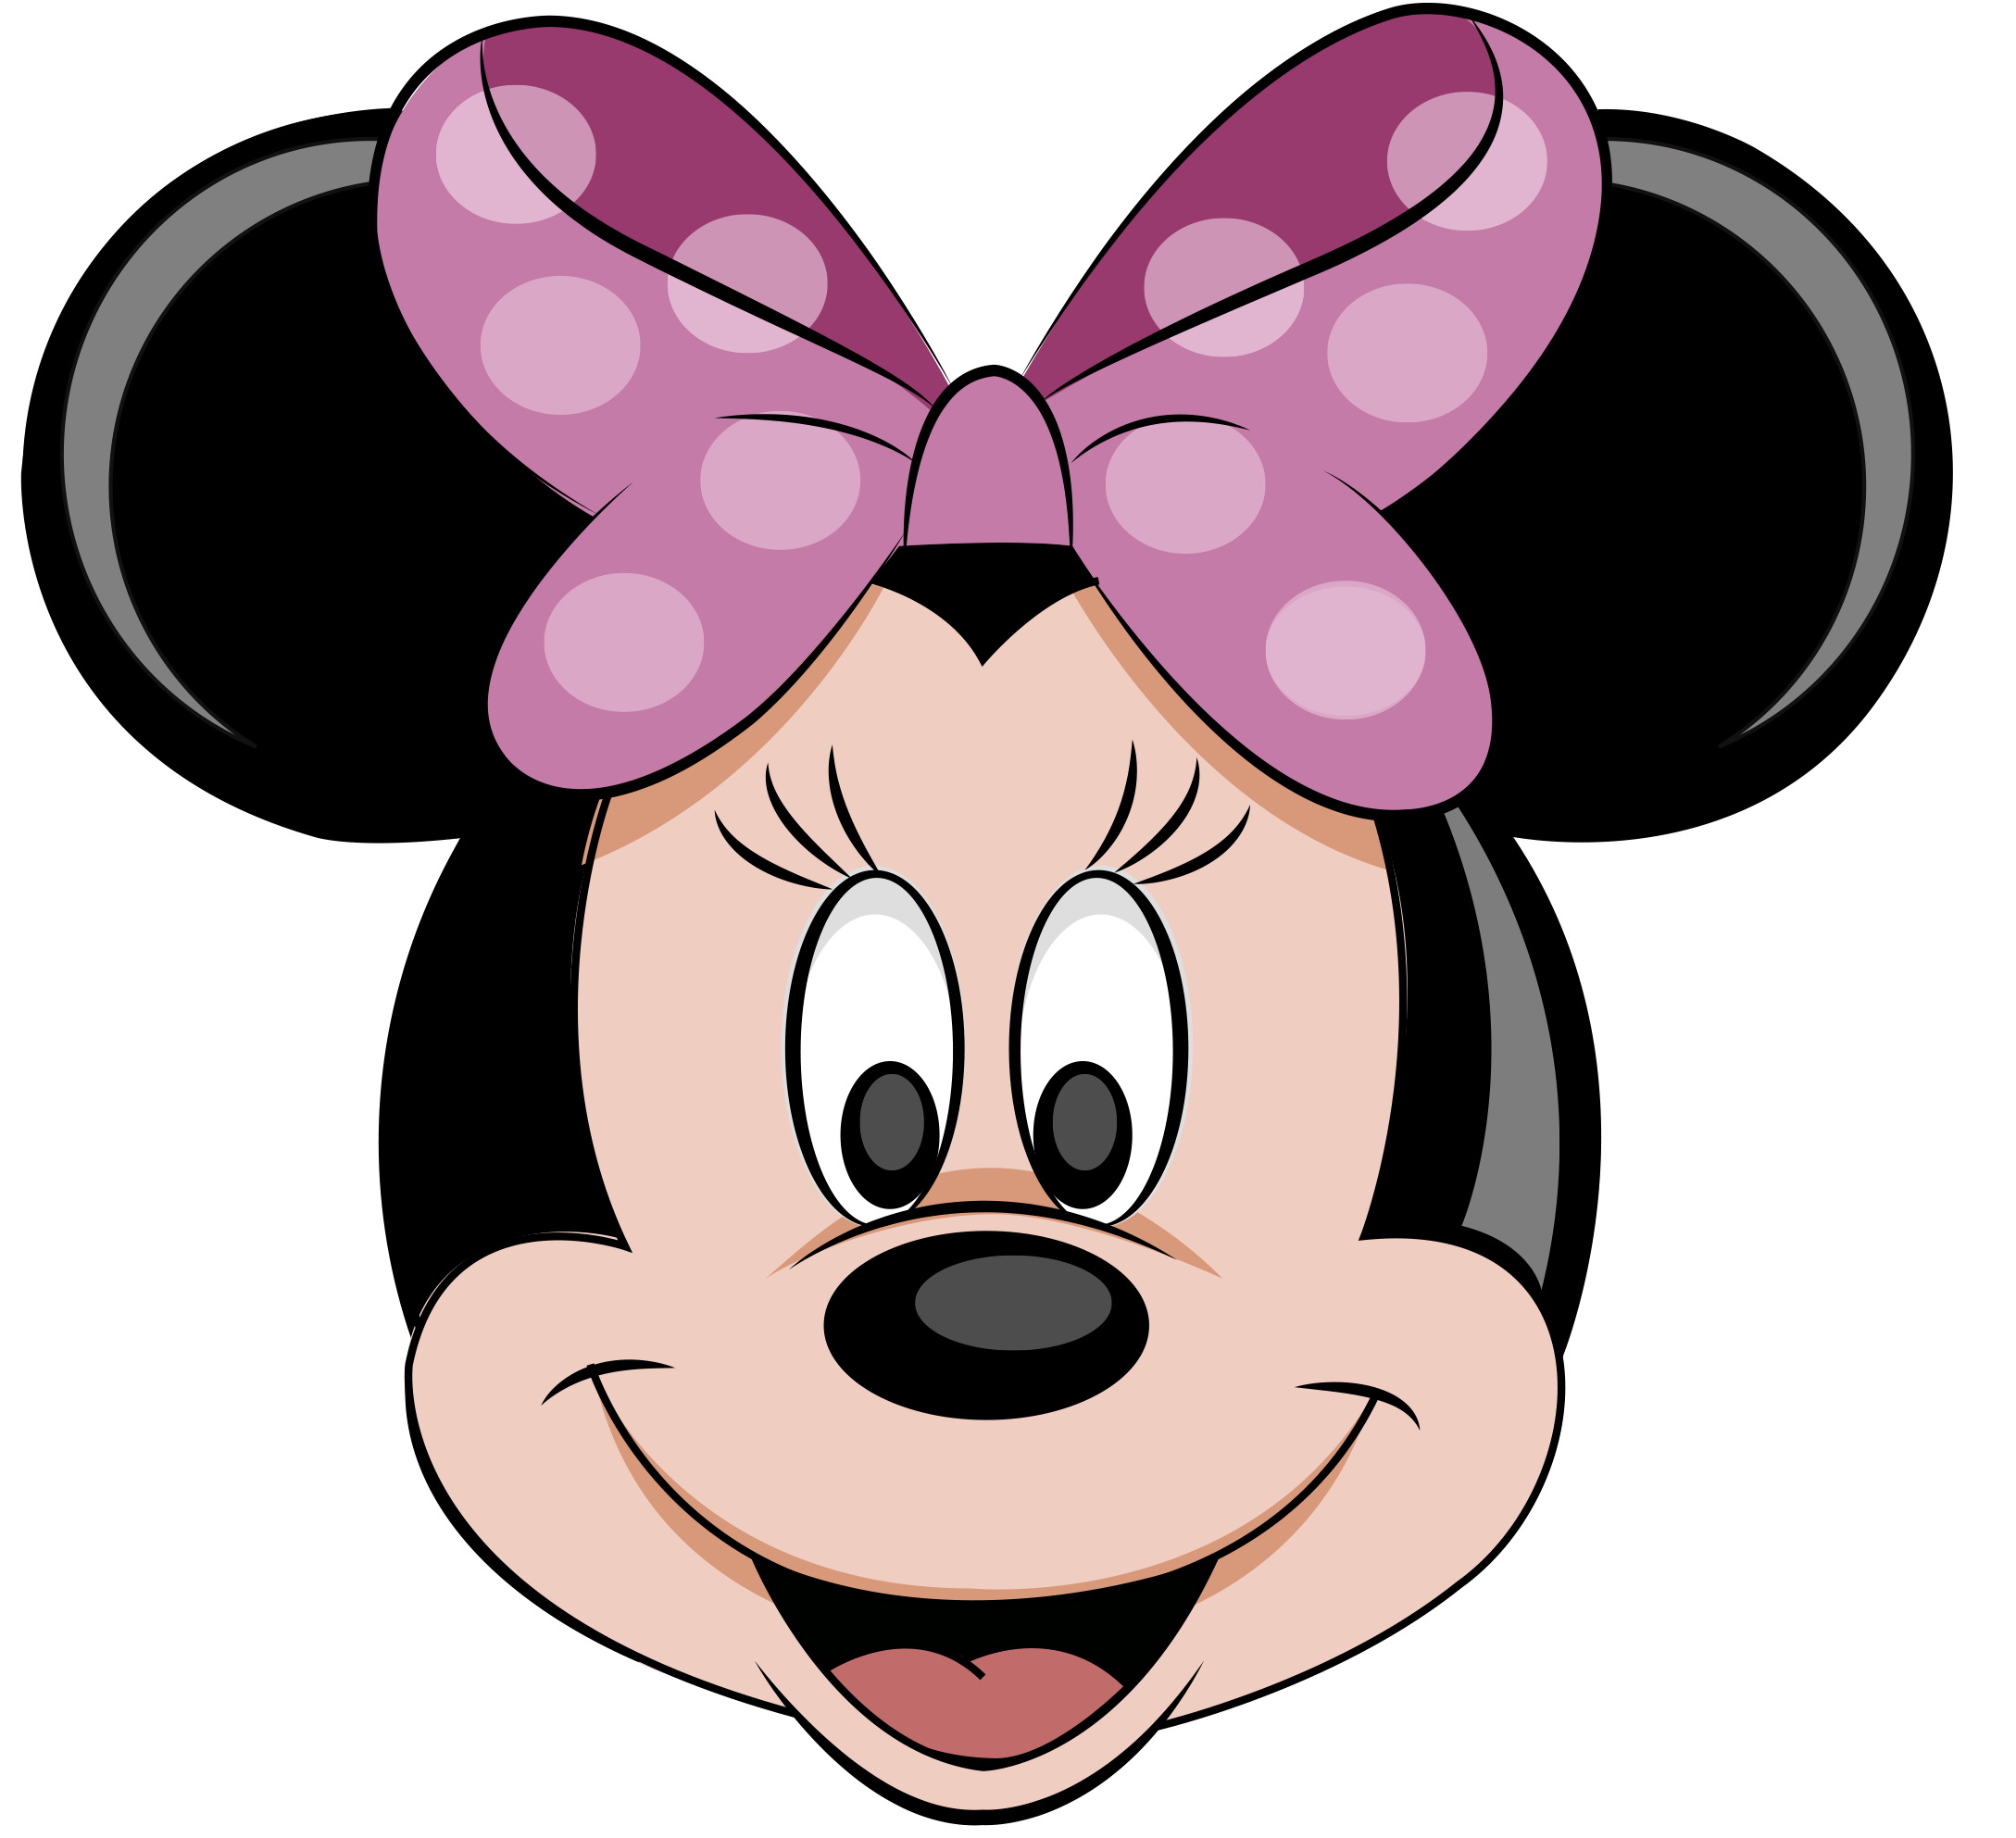 Criminal clipart typical. Pink minnie mouse png